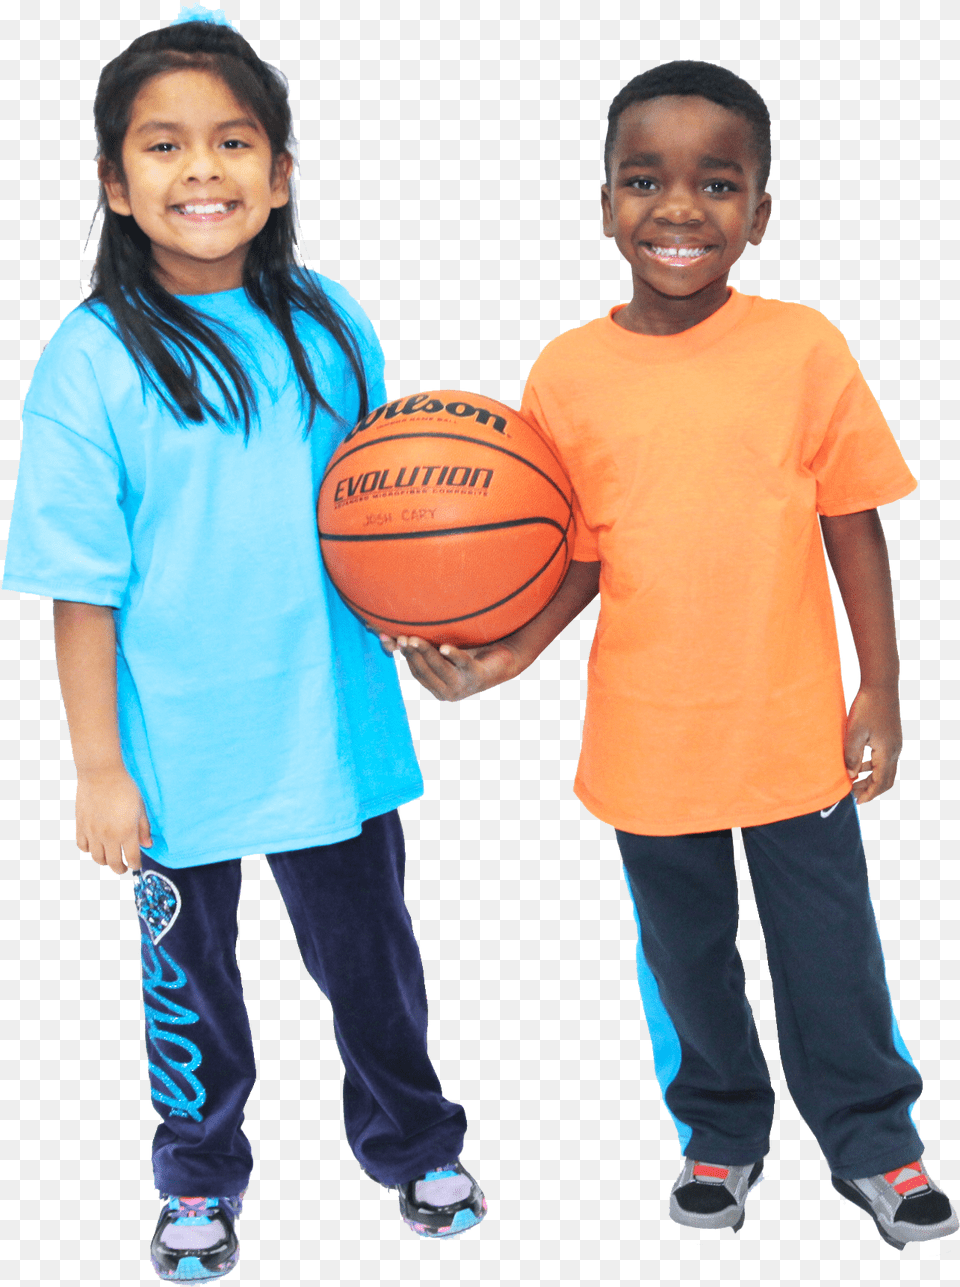 People Sport Image Portable Network Graphics, Ball, T-shirt, Clothing, Basketball Free Png Download